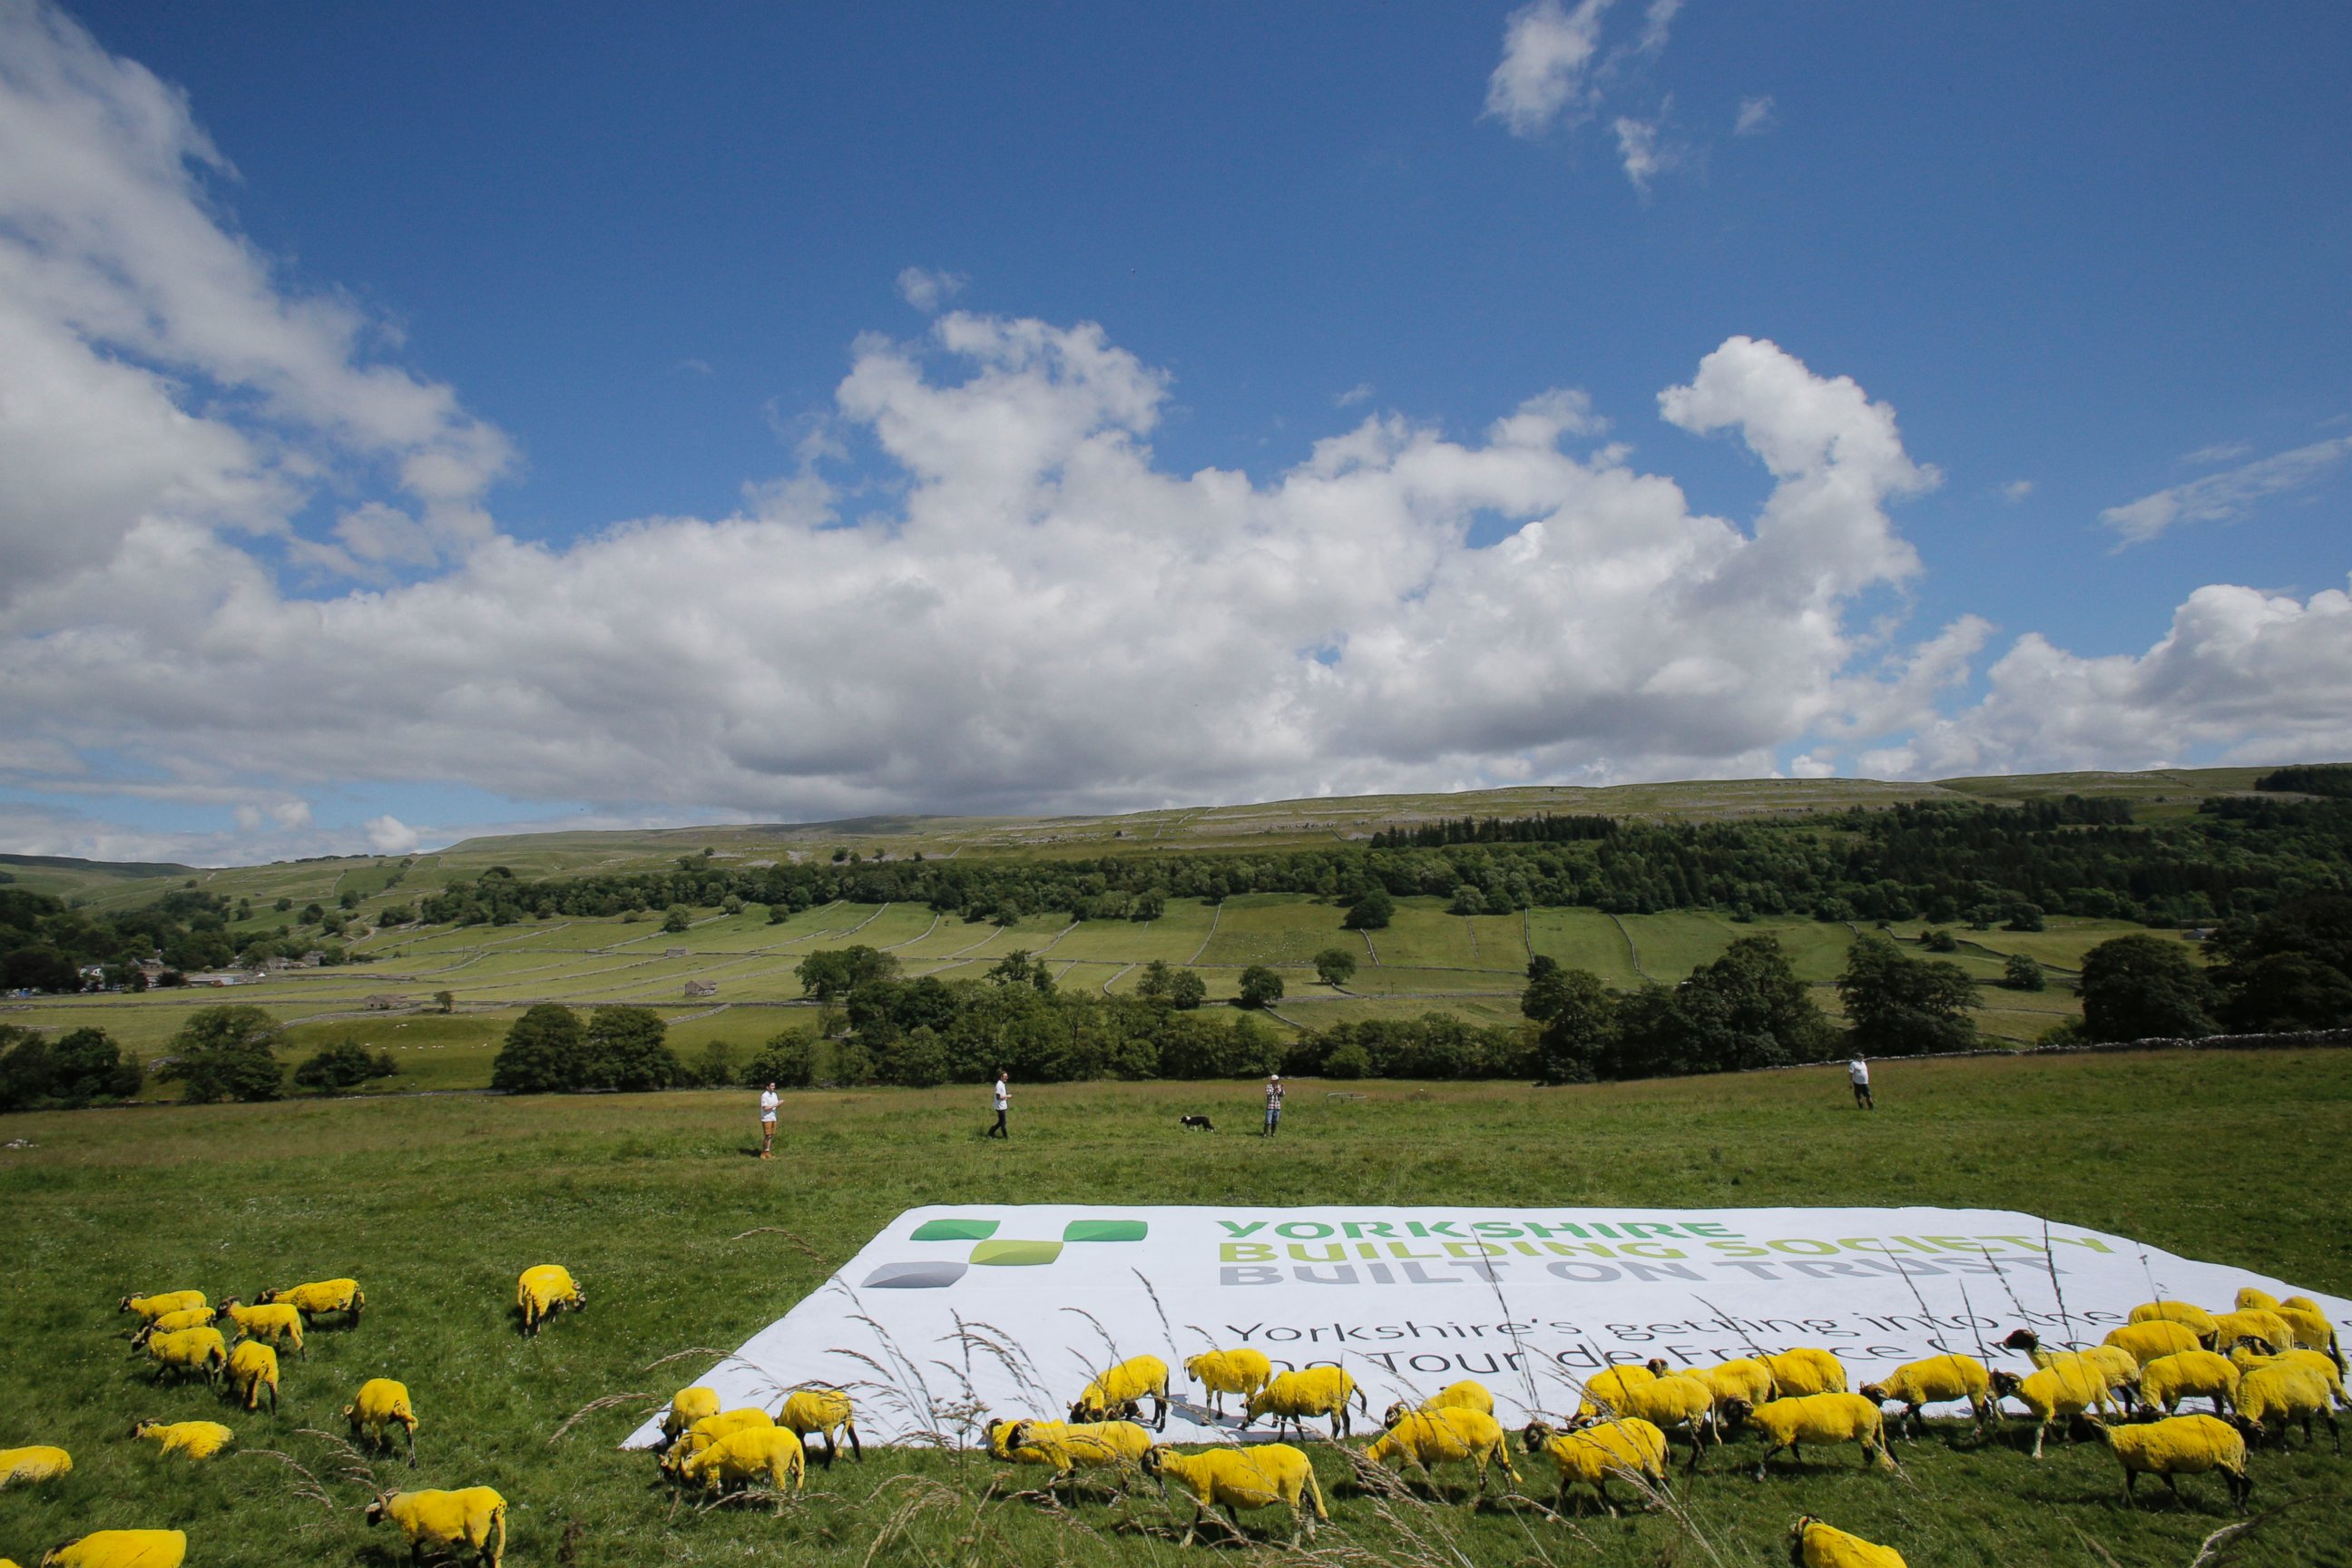 PHOTO: Sheep that have painted yellow walk in a meadow during the first stage of the Tour de France cycling race over 190.5 kilometers (118.4 miles) with start in Leeds and finish in Harrogate, England, Saturday, July 5, 2014.